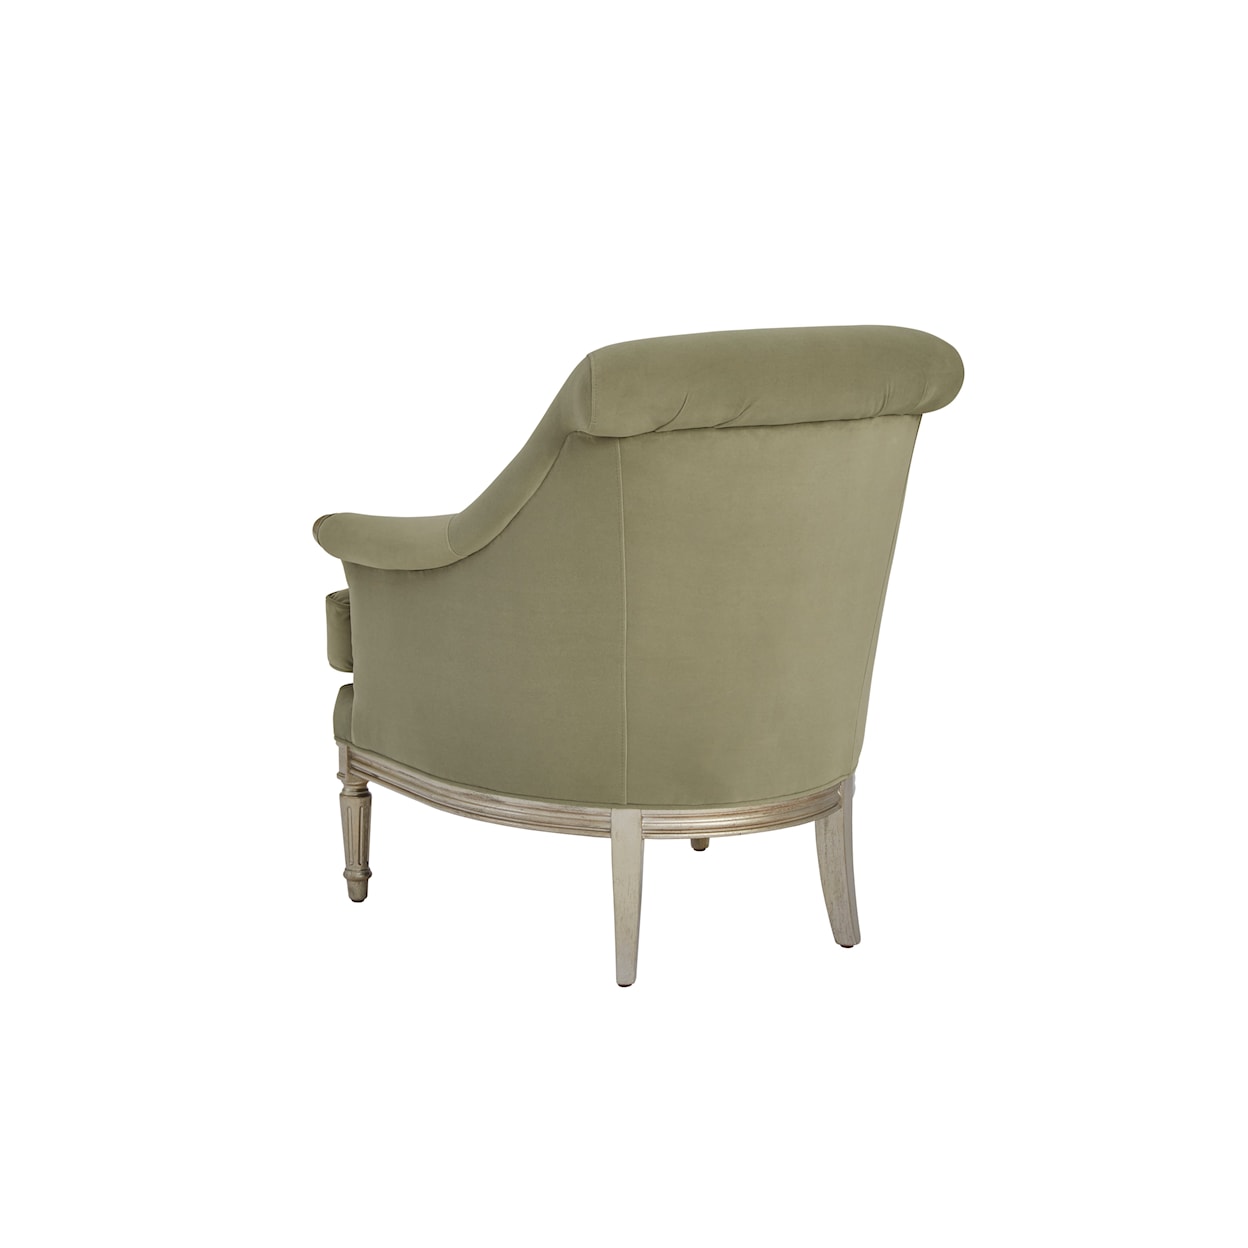 A.R.T. Furniture Inc 176 - Provenance Accent Chair